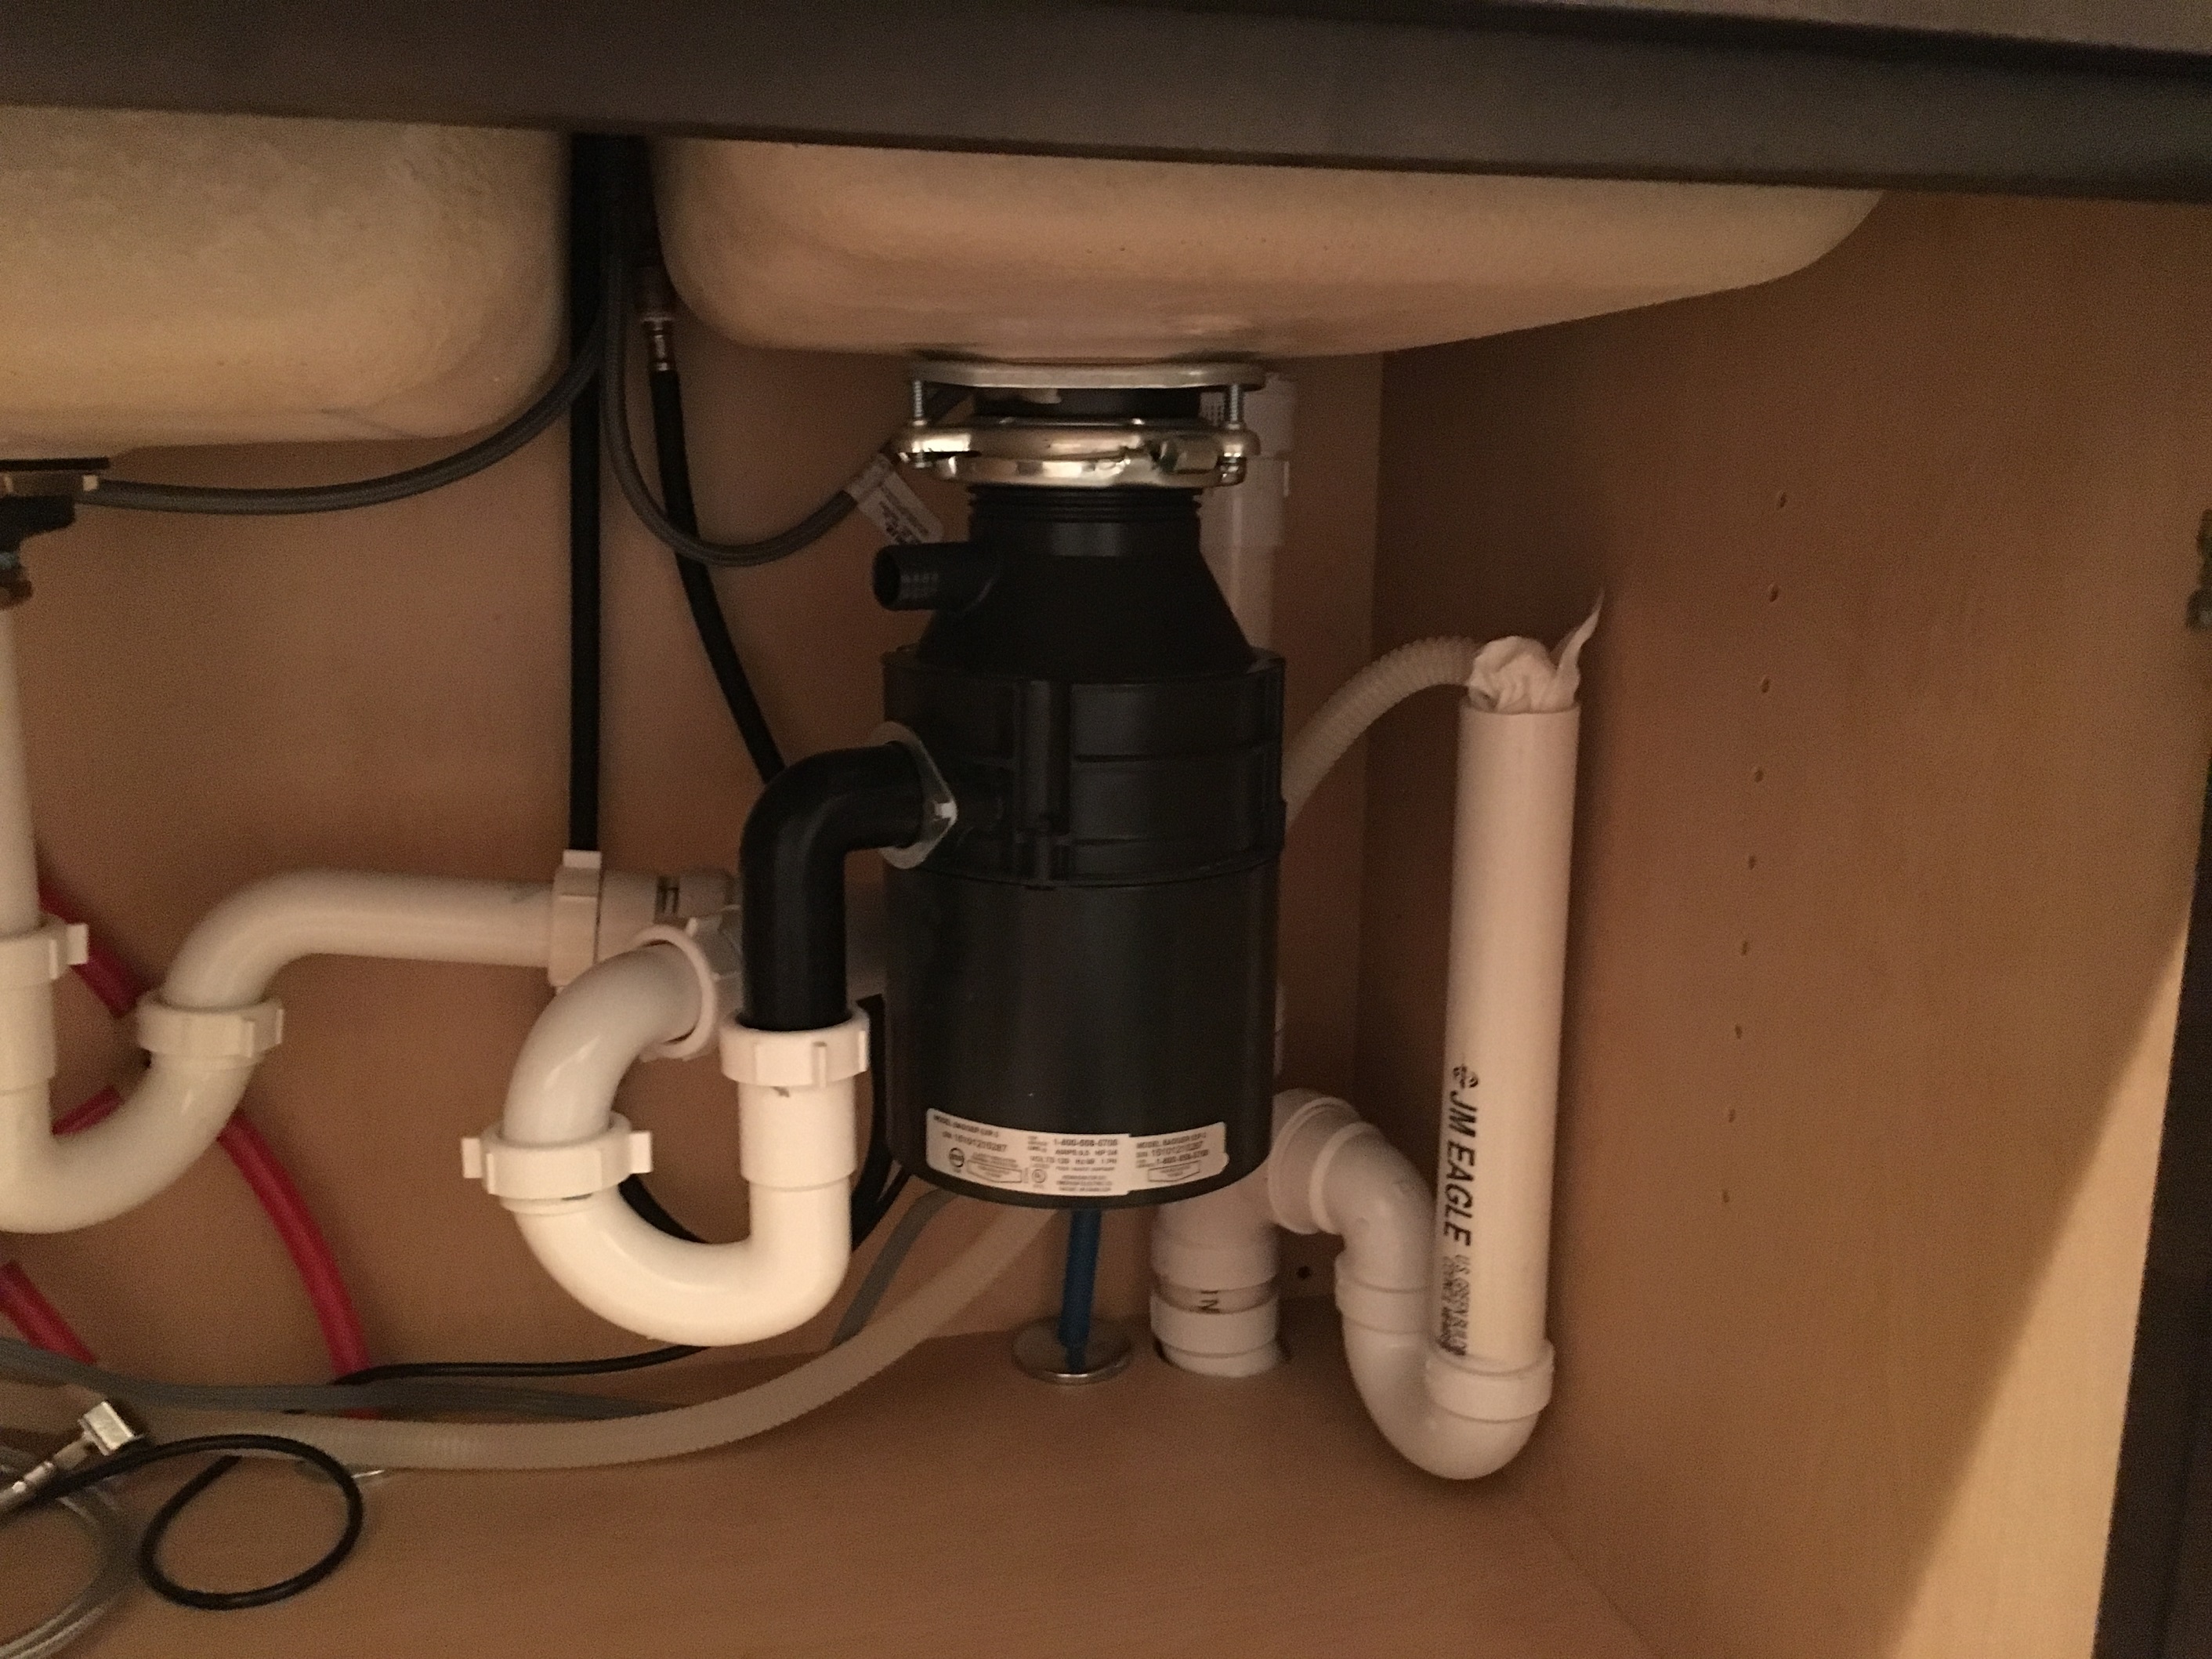 sewer smell from kitchen sink